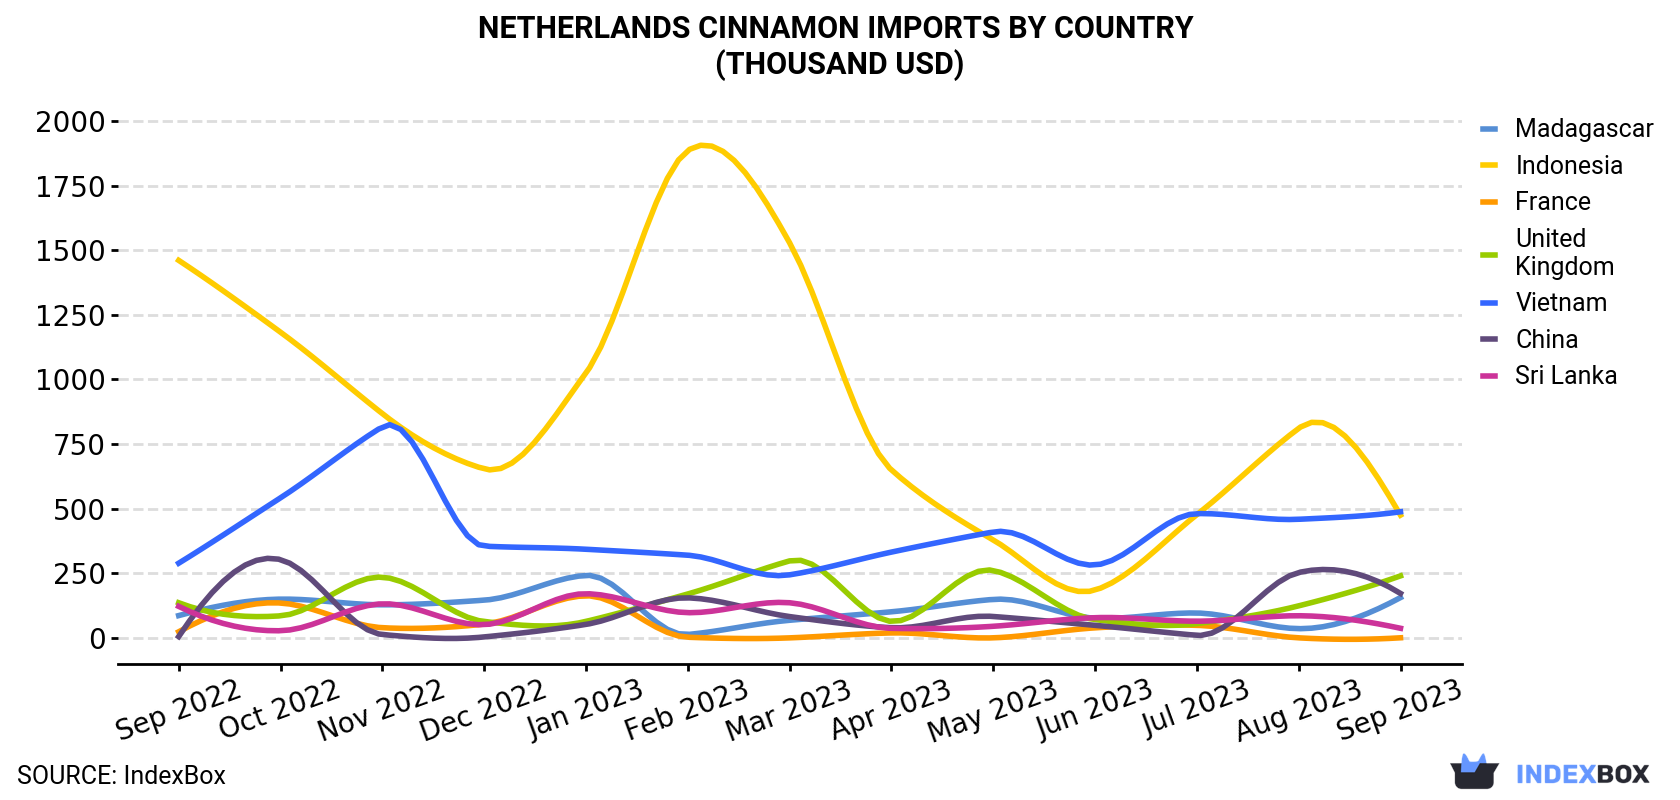 Netherlands Cinnamon Imports By Country (Thousand USD)